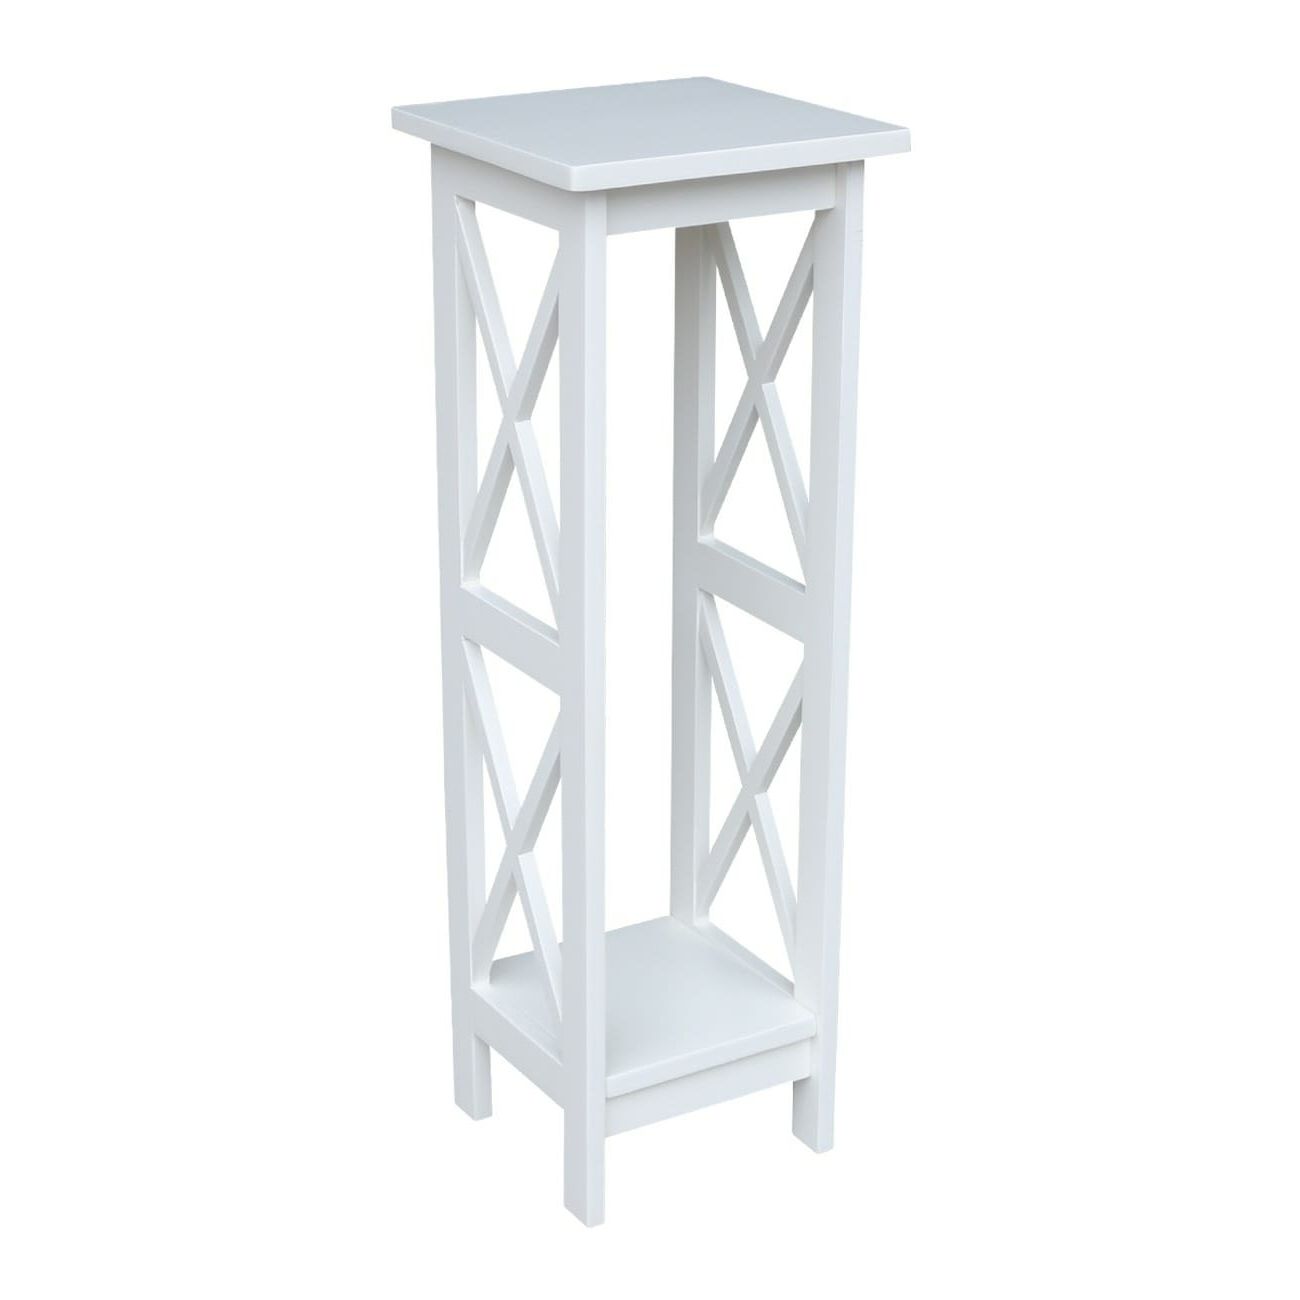 36 Inch Plant Stands With Favorite Ot 3069x 36 Inch Tall X Sided Plant Stand (View 5 of 15)